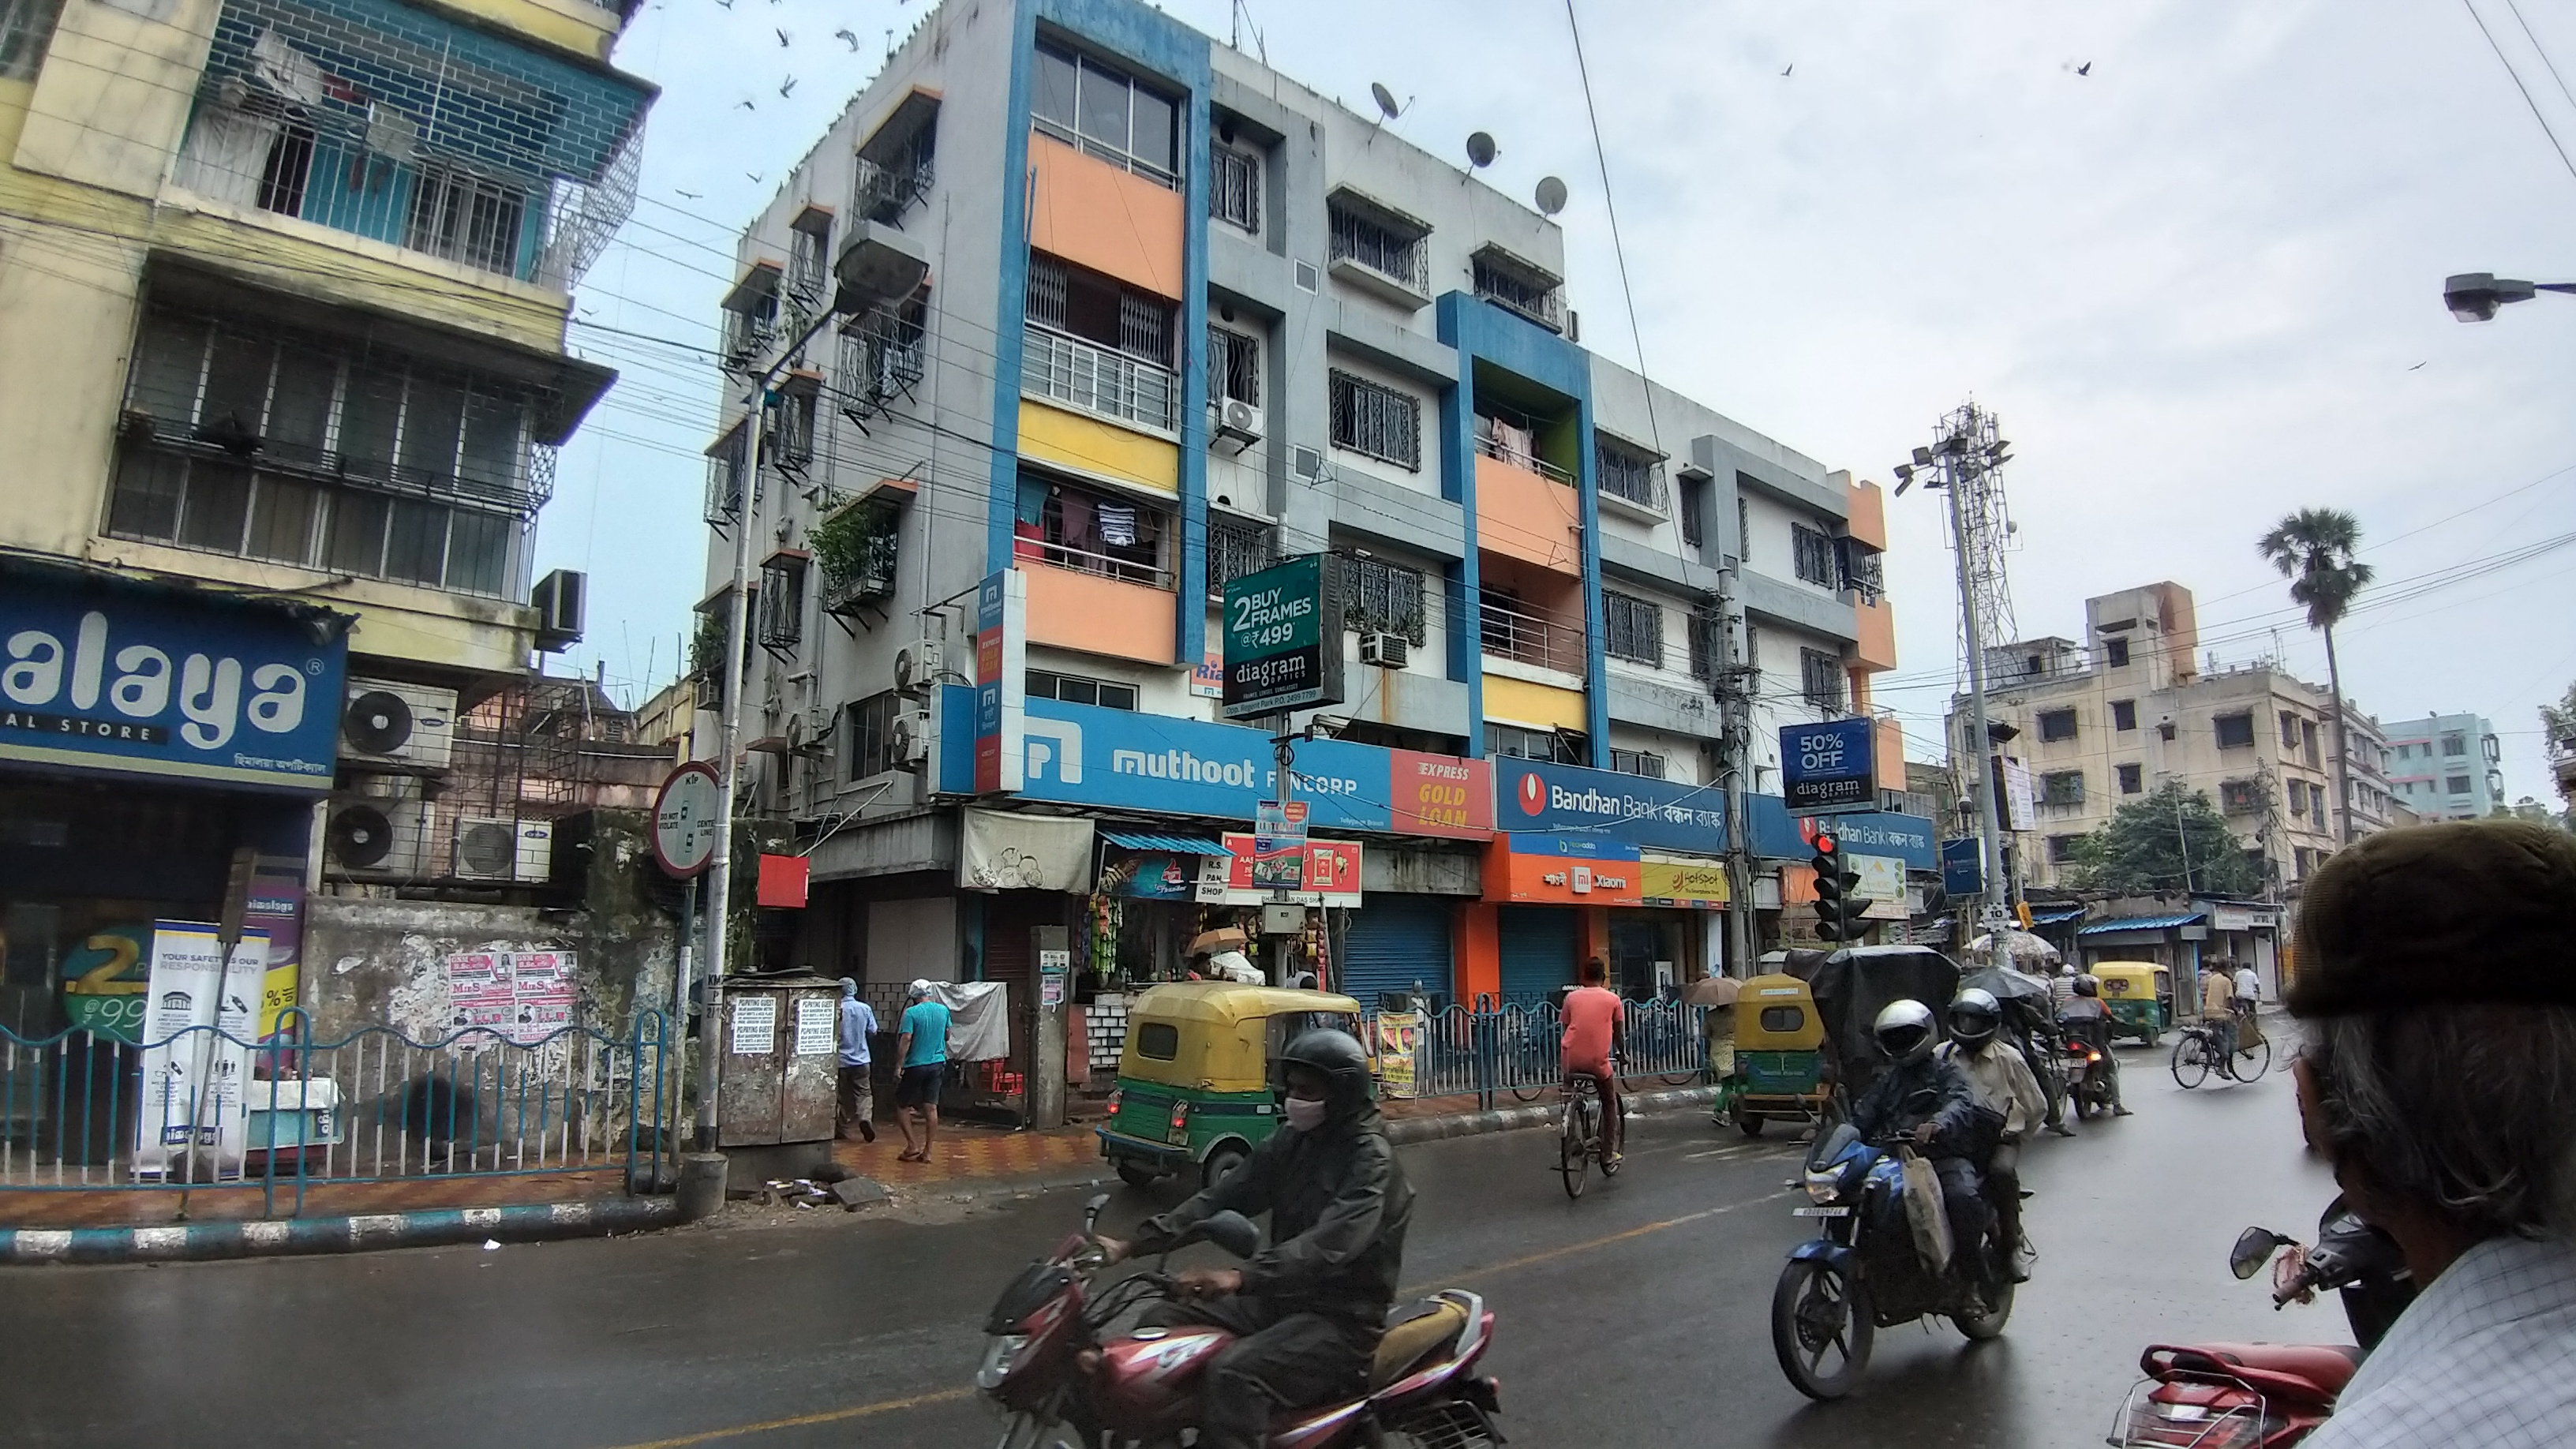 Photos and Videos of Muthoot Fincorp Gold Loan in Tollygunge, Kolkata